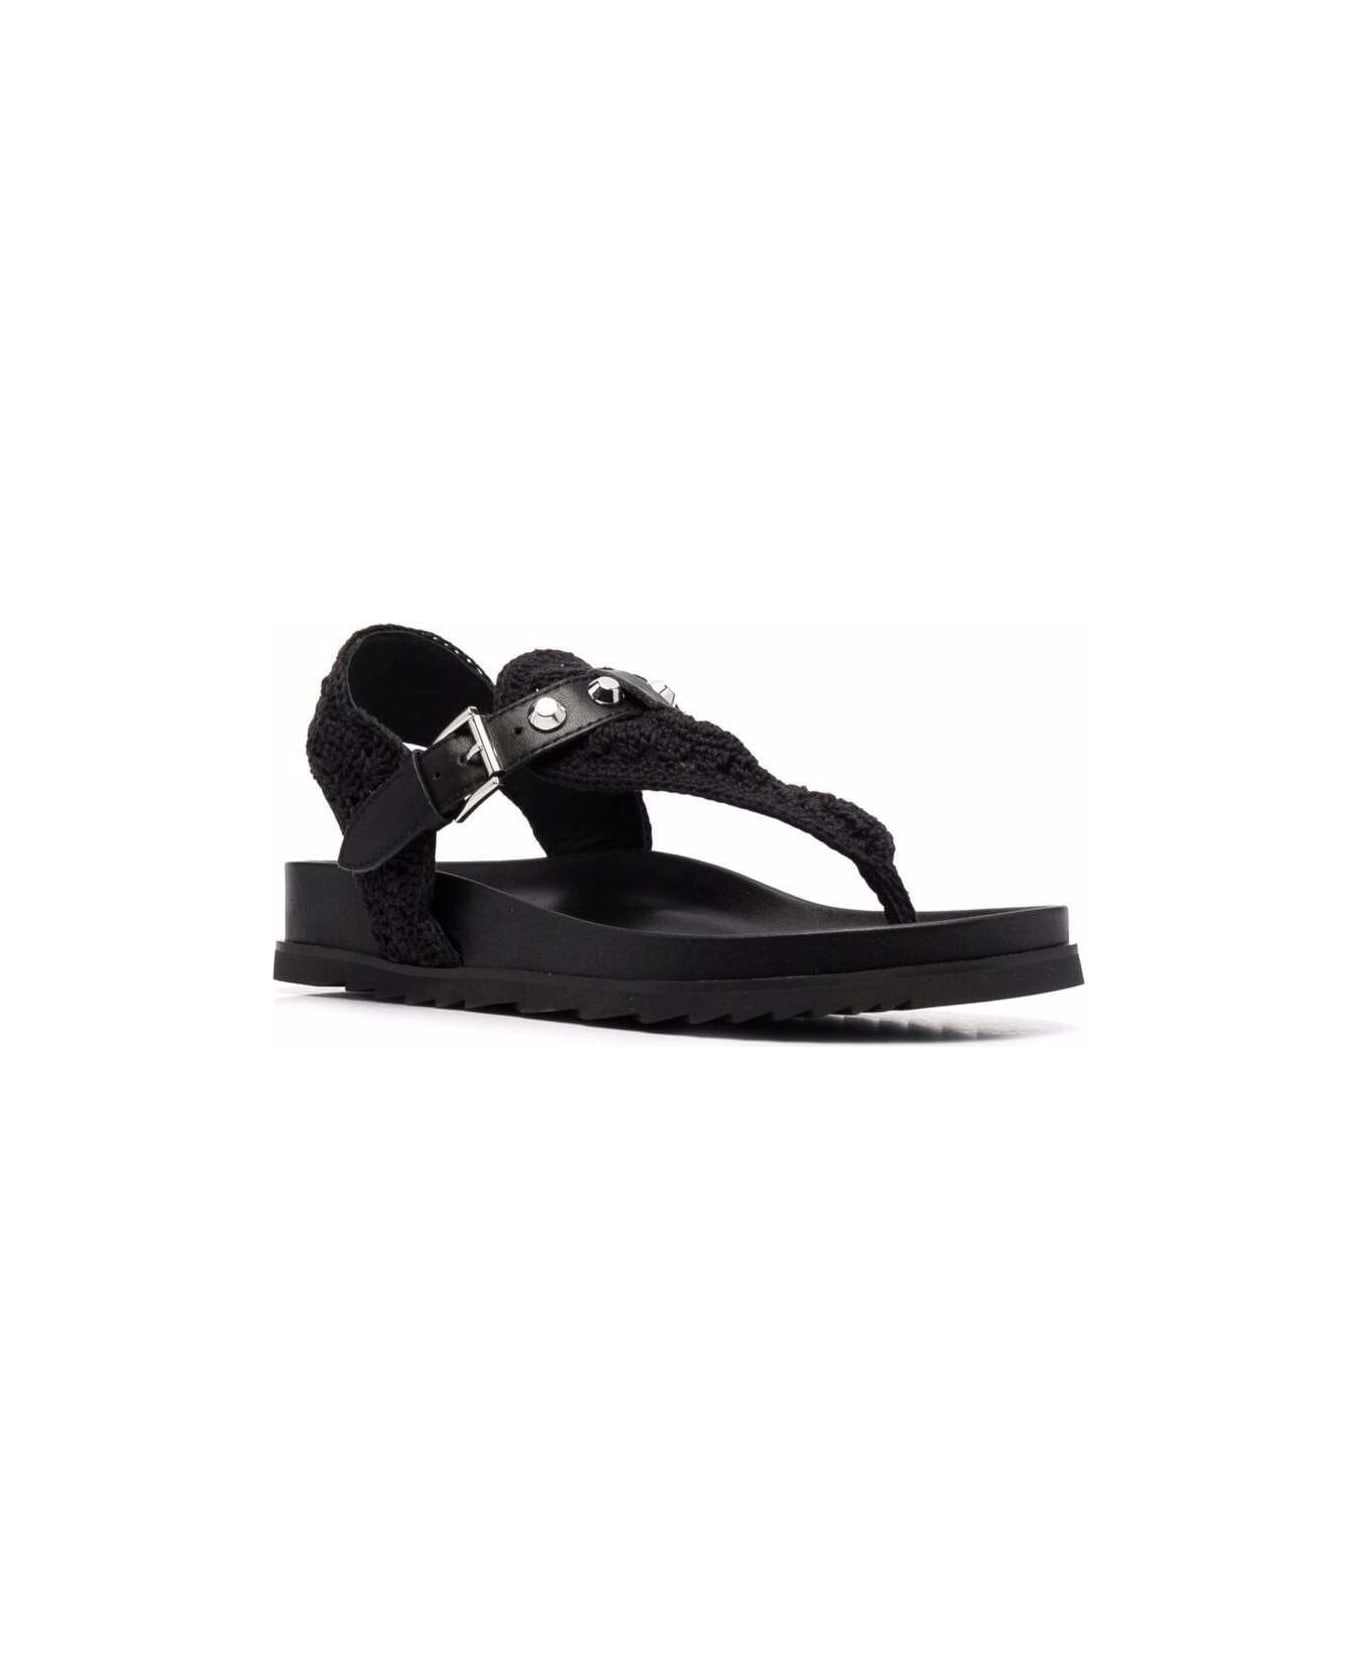 Ash Woman's Black Leather Sandals With Crochet  Insert - Black